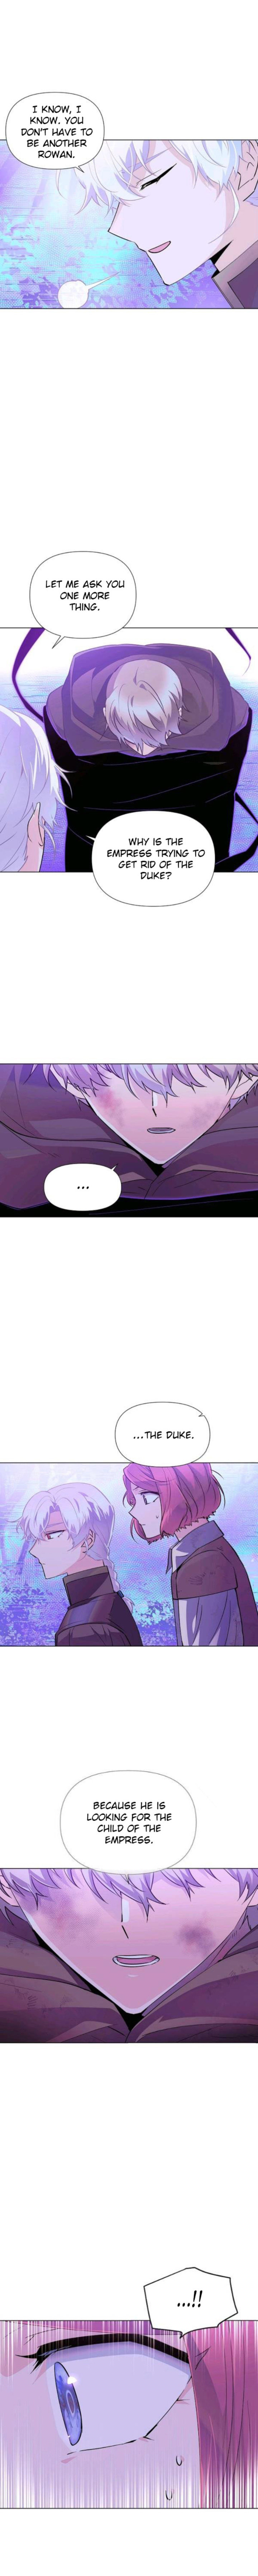 The Villain Discovered My Identity Chapter 63 - Page 13